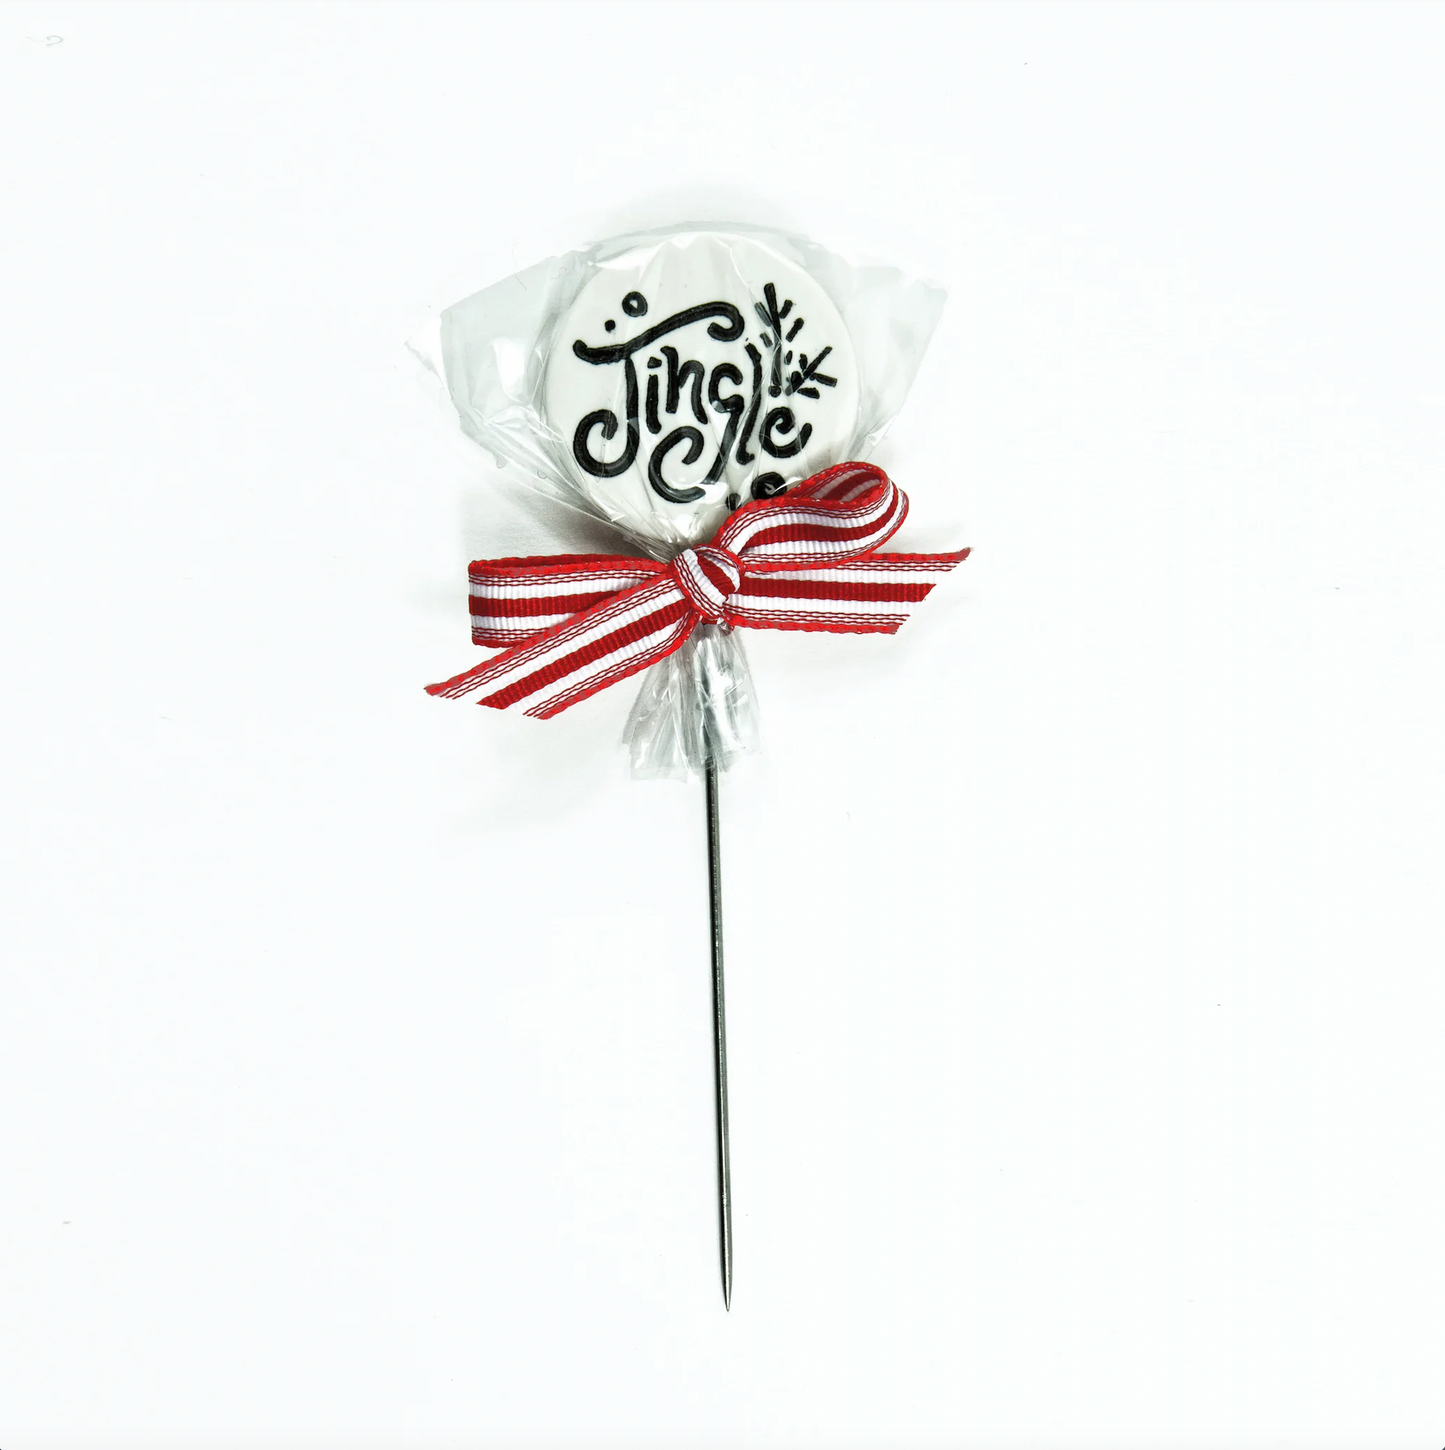 Photo by JustAnotherButtonCompany.com [additional_image_link]